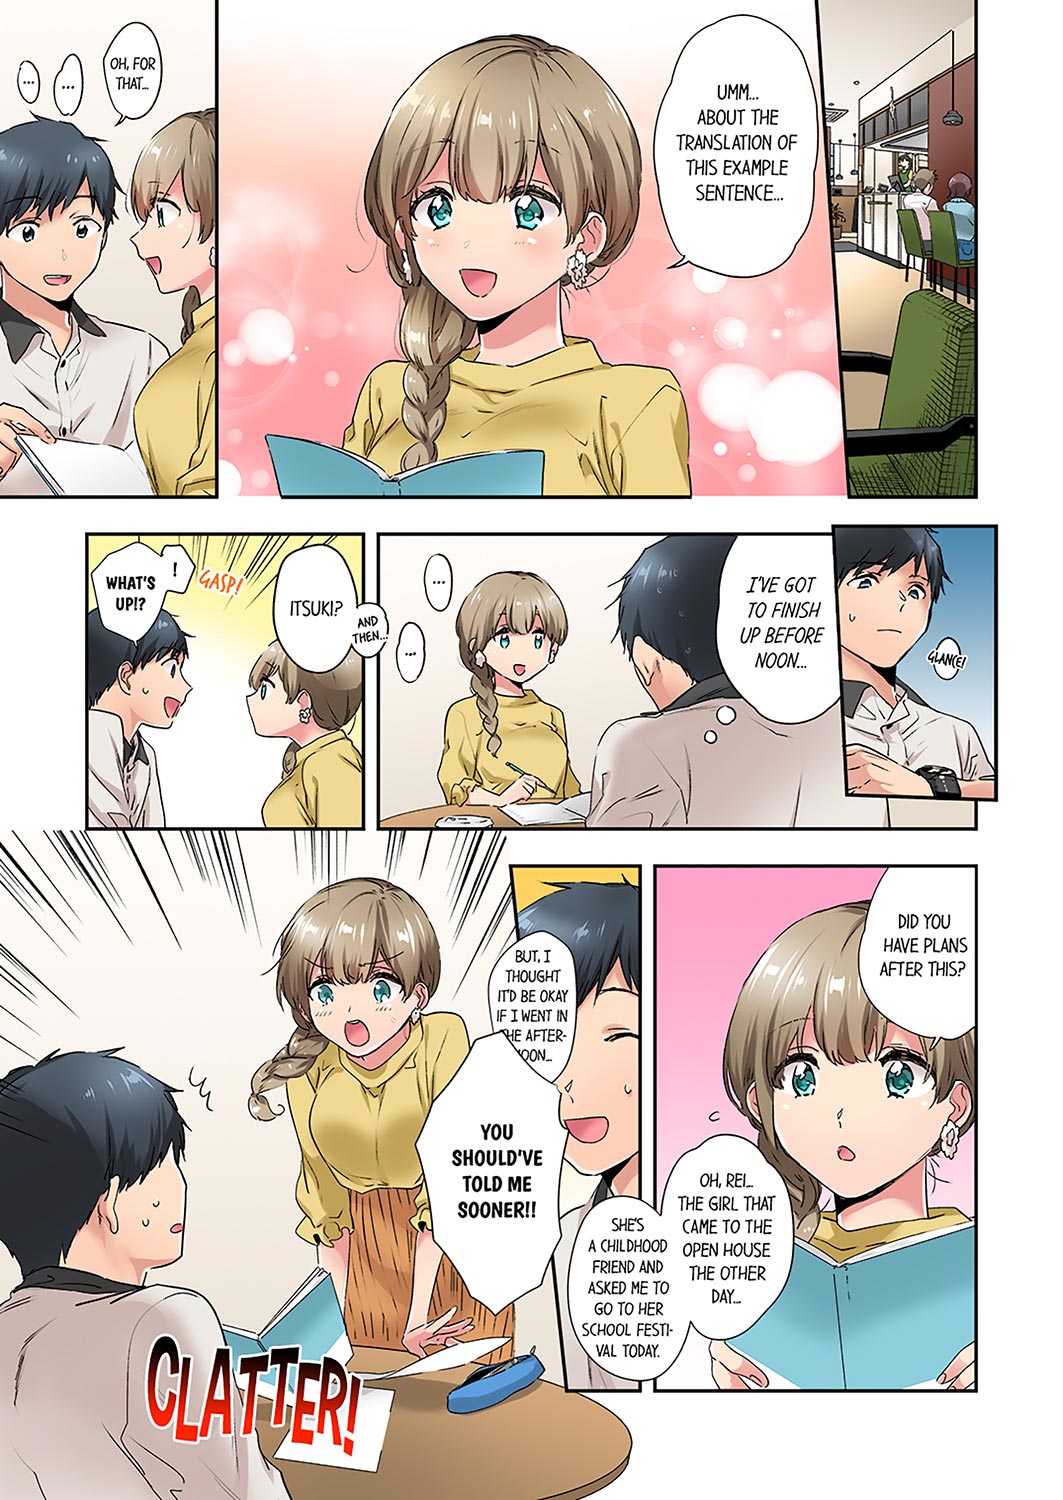 A Scorching Hot Day with A Broken Air Conditioner. If I Keep Having Sex with My Sweaty Childhood Friend… - Chapter 13 Page 1